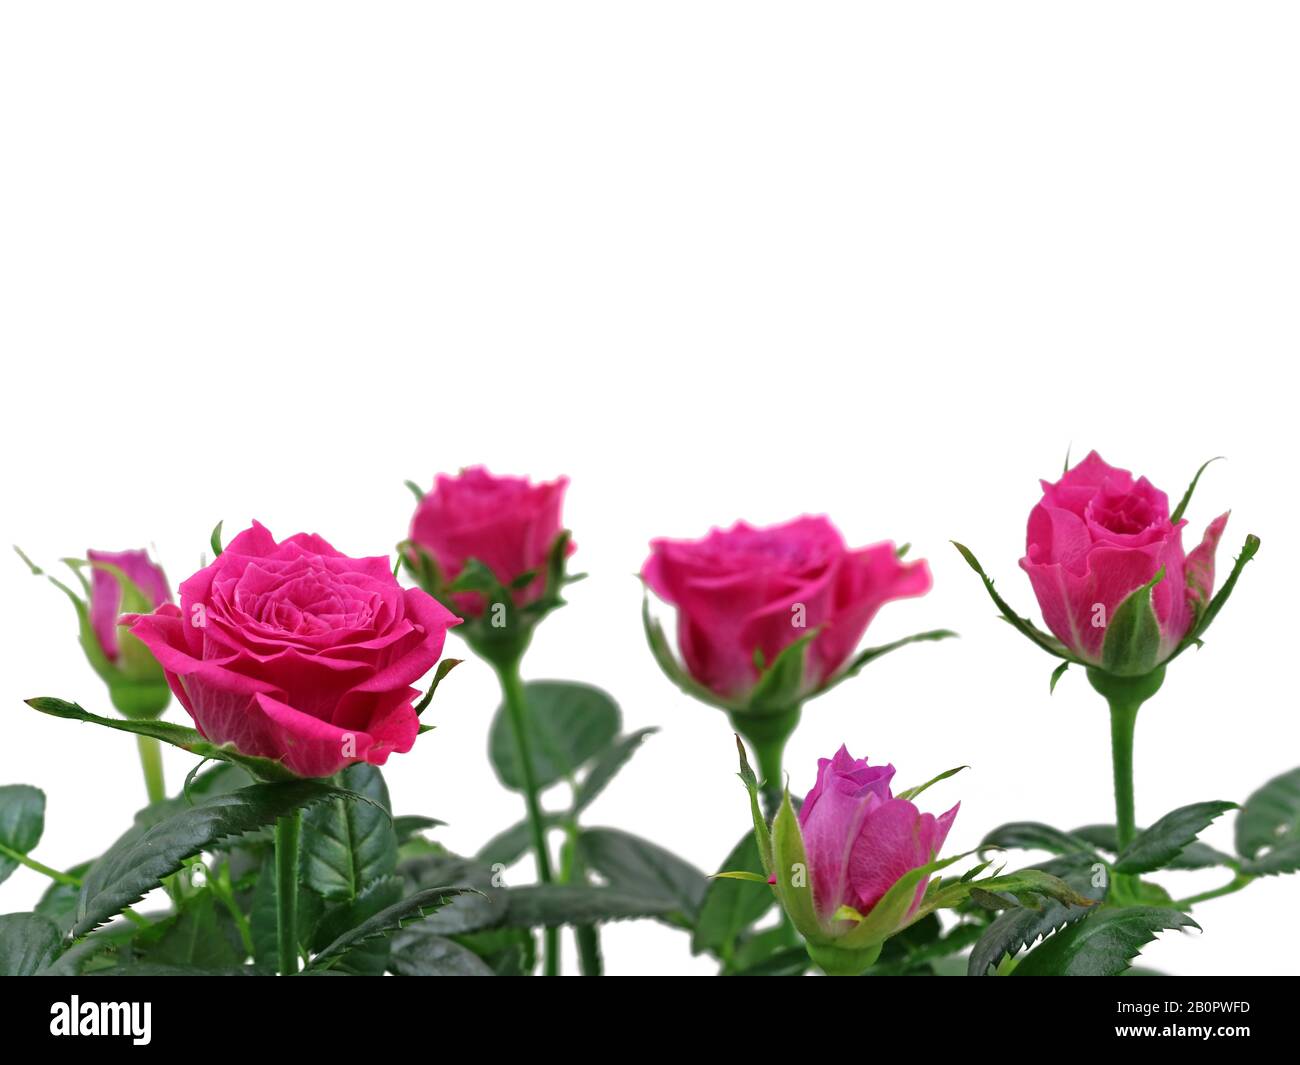 pink roses close up isolated on white background with copy space Stock Photo